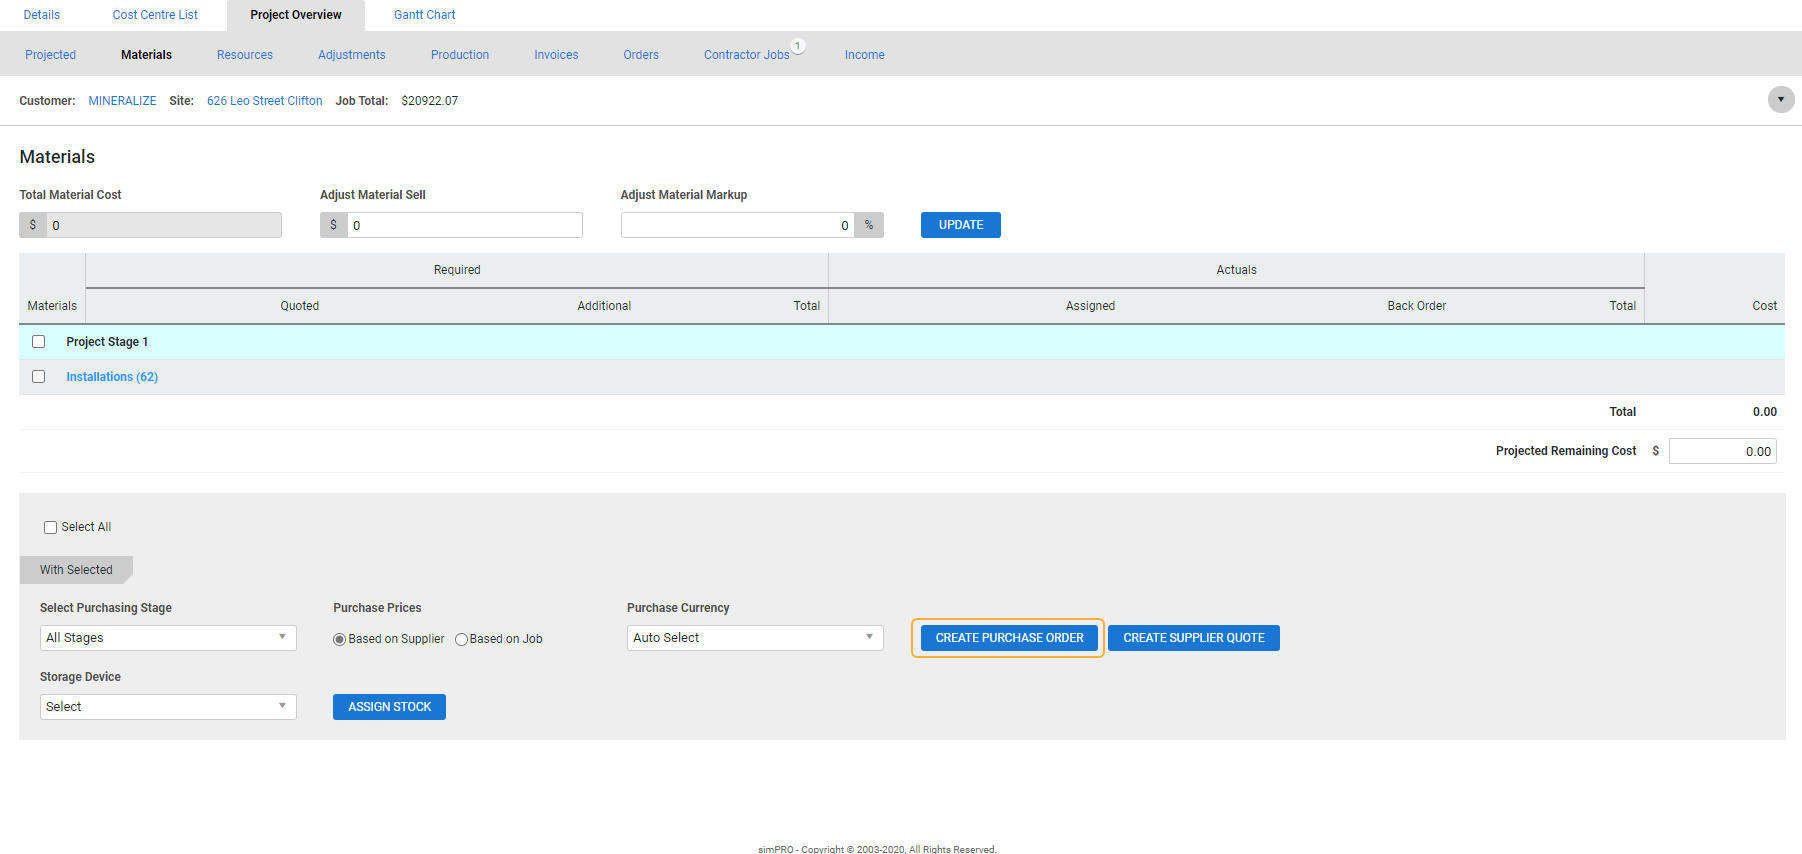 A screenshot of the Create Purchase Order button in the Project Overview tab.